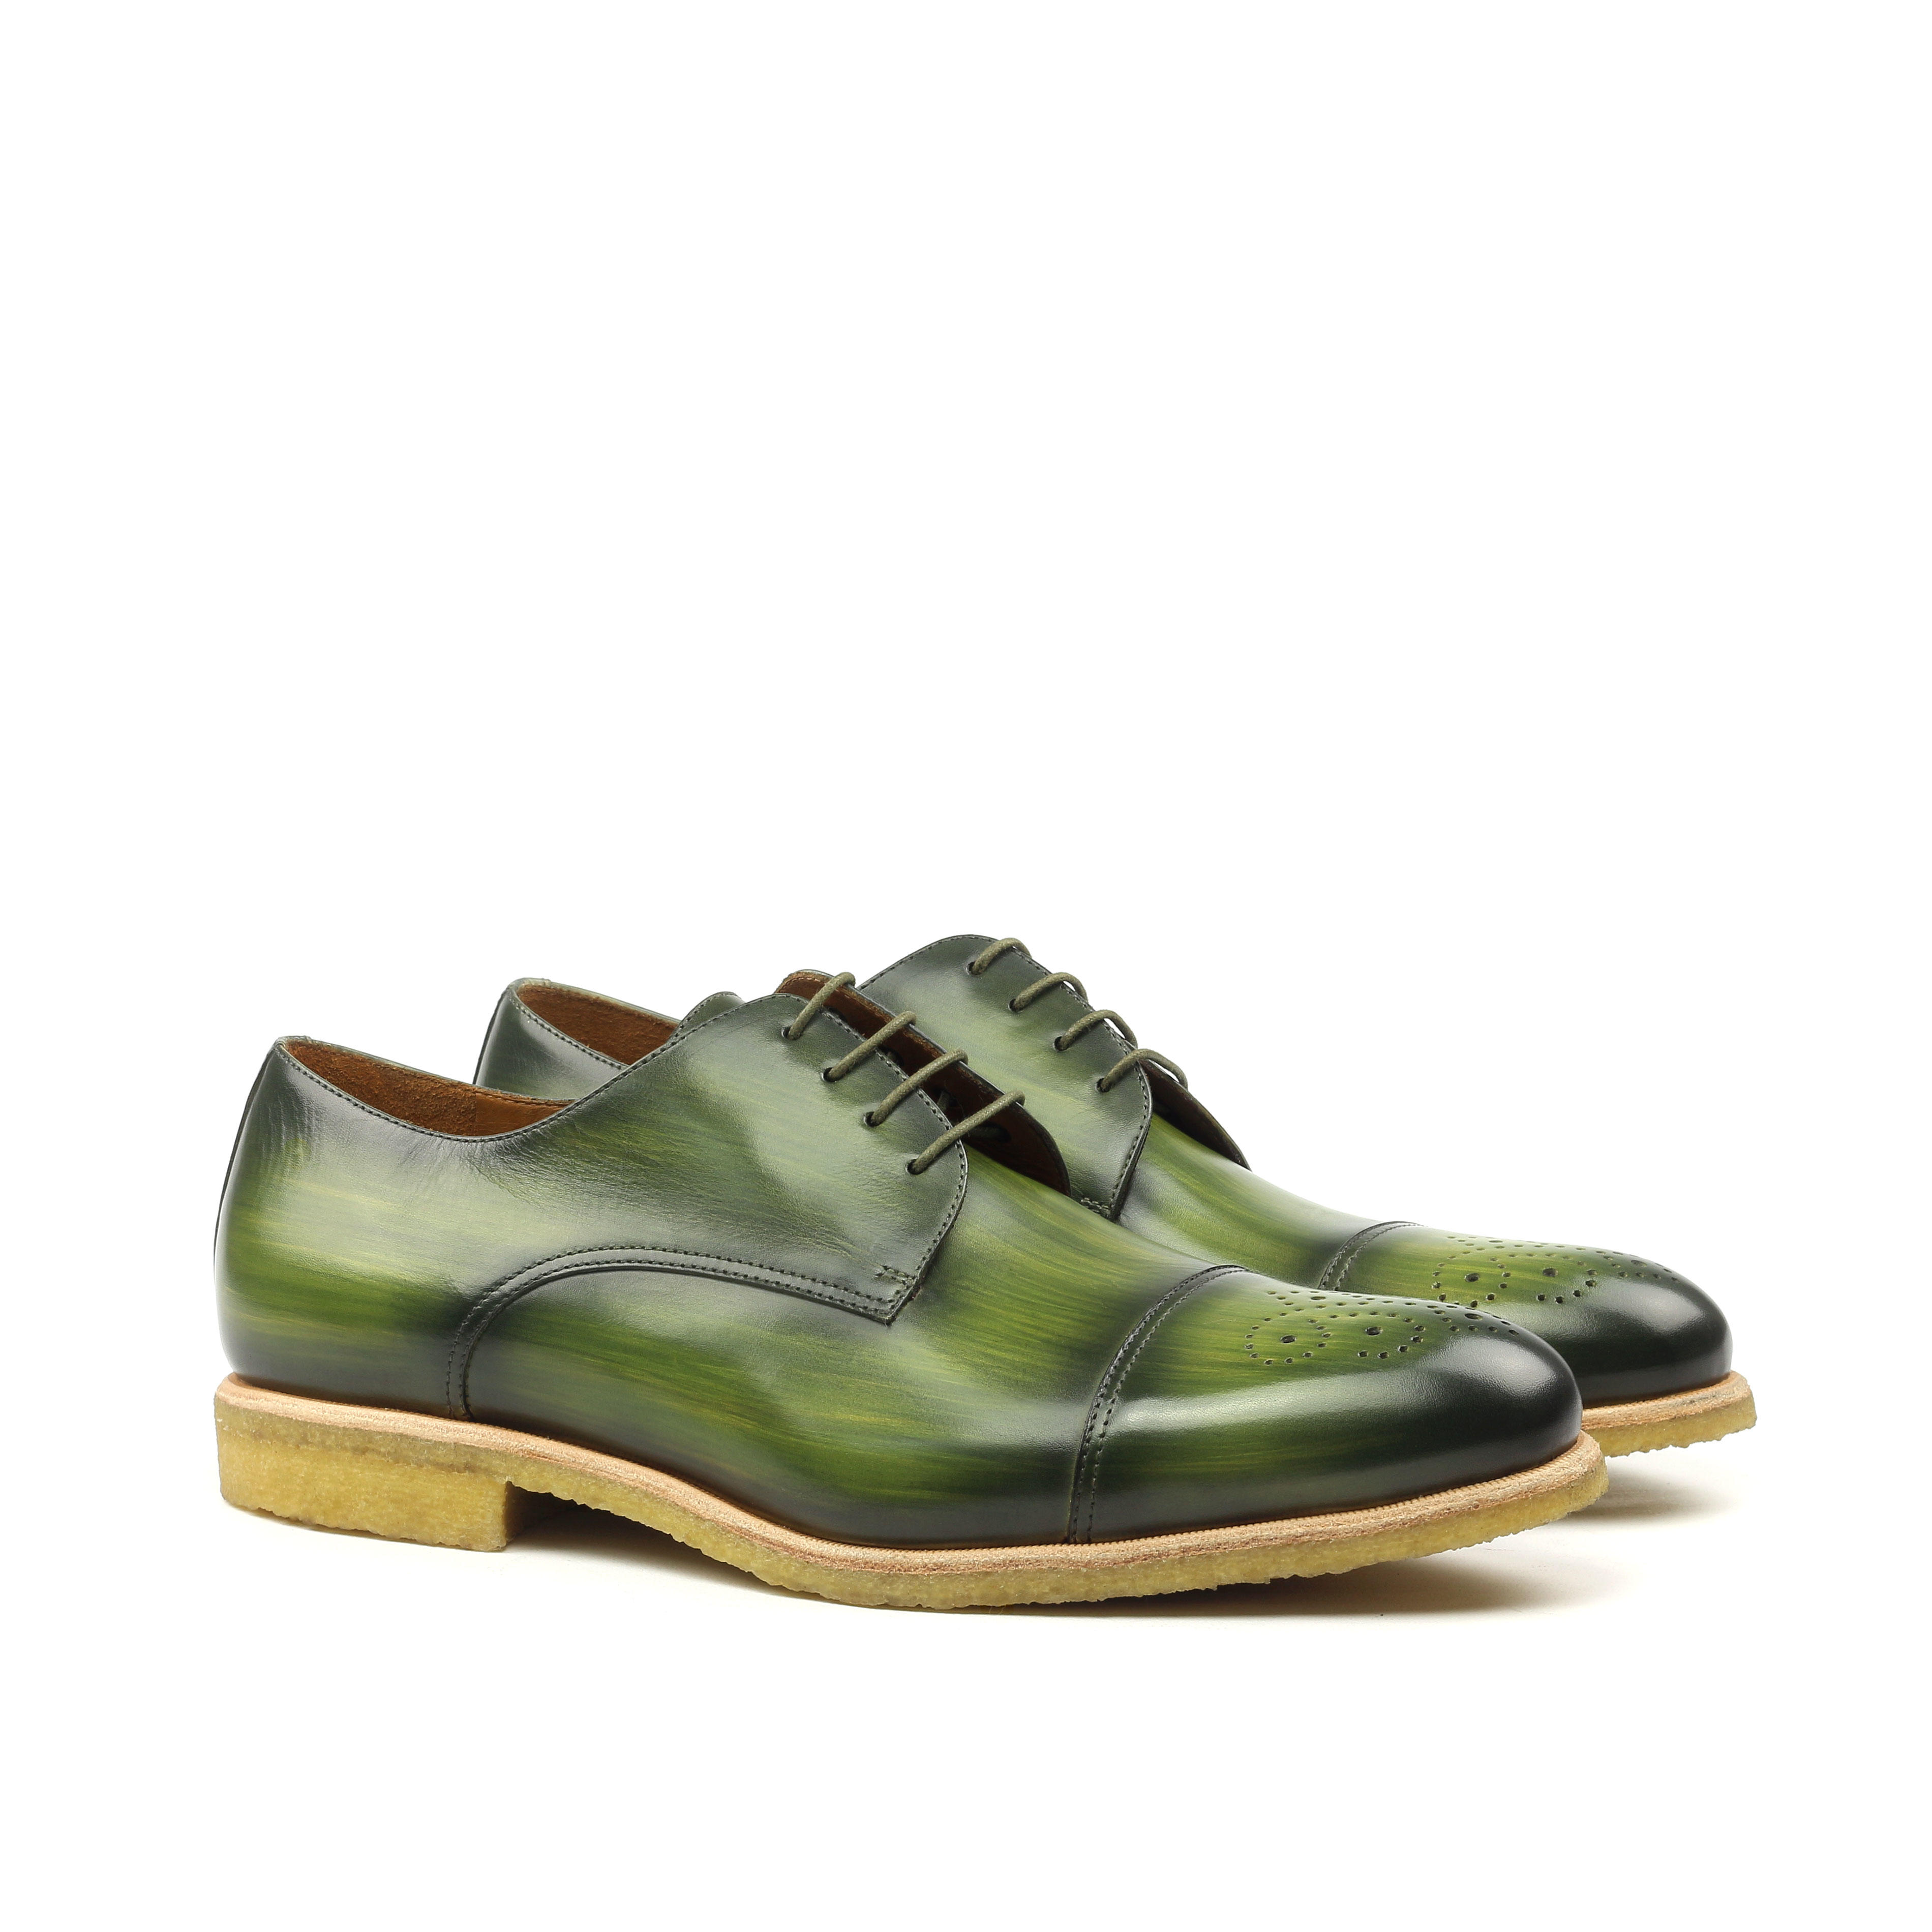 Manor of London 'The Derby'  Khaki Patina Punched Toe Shoe Luxury Custom Initials Monogrammed Front Side View